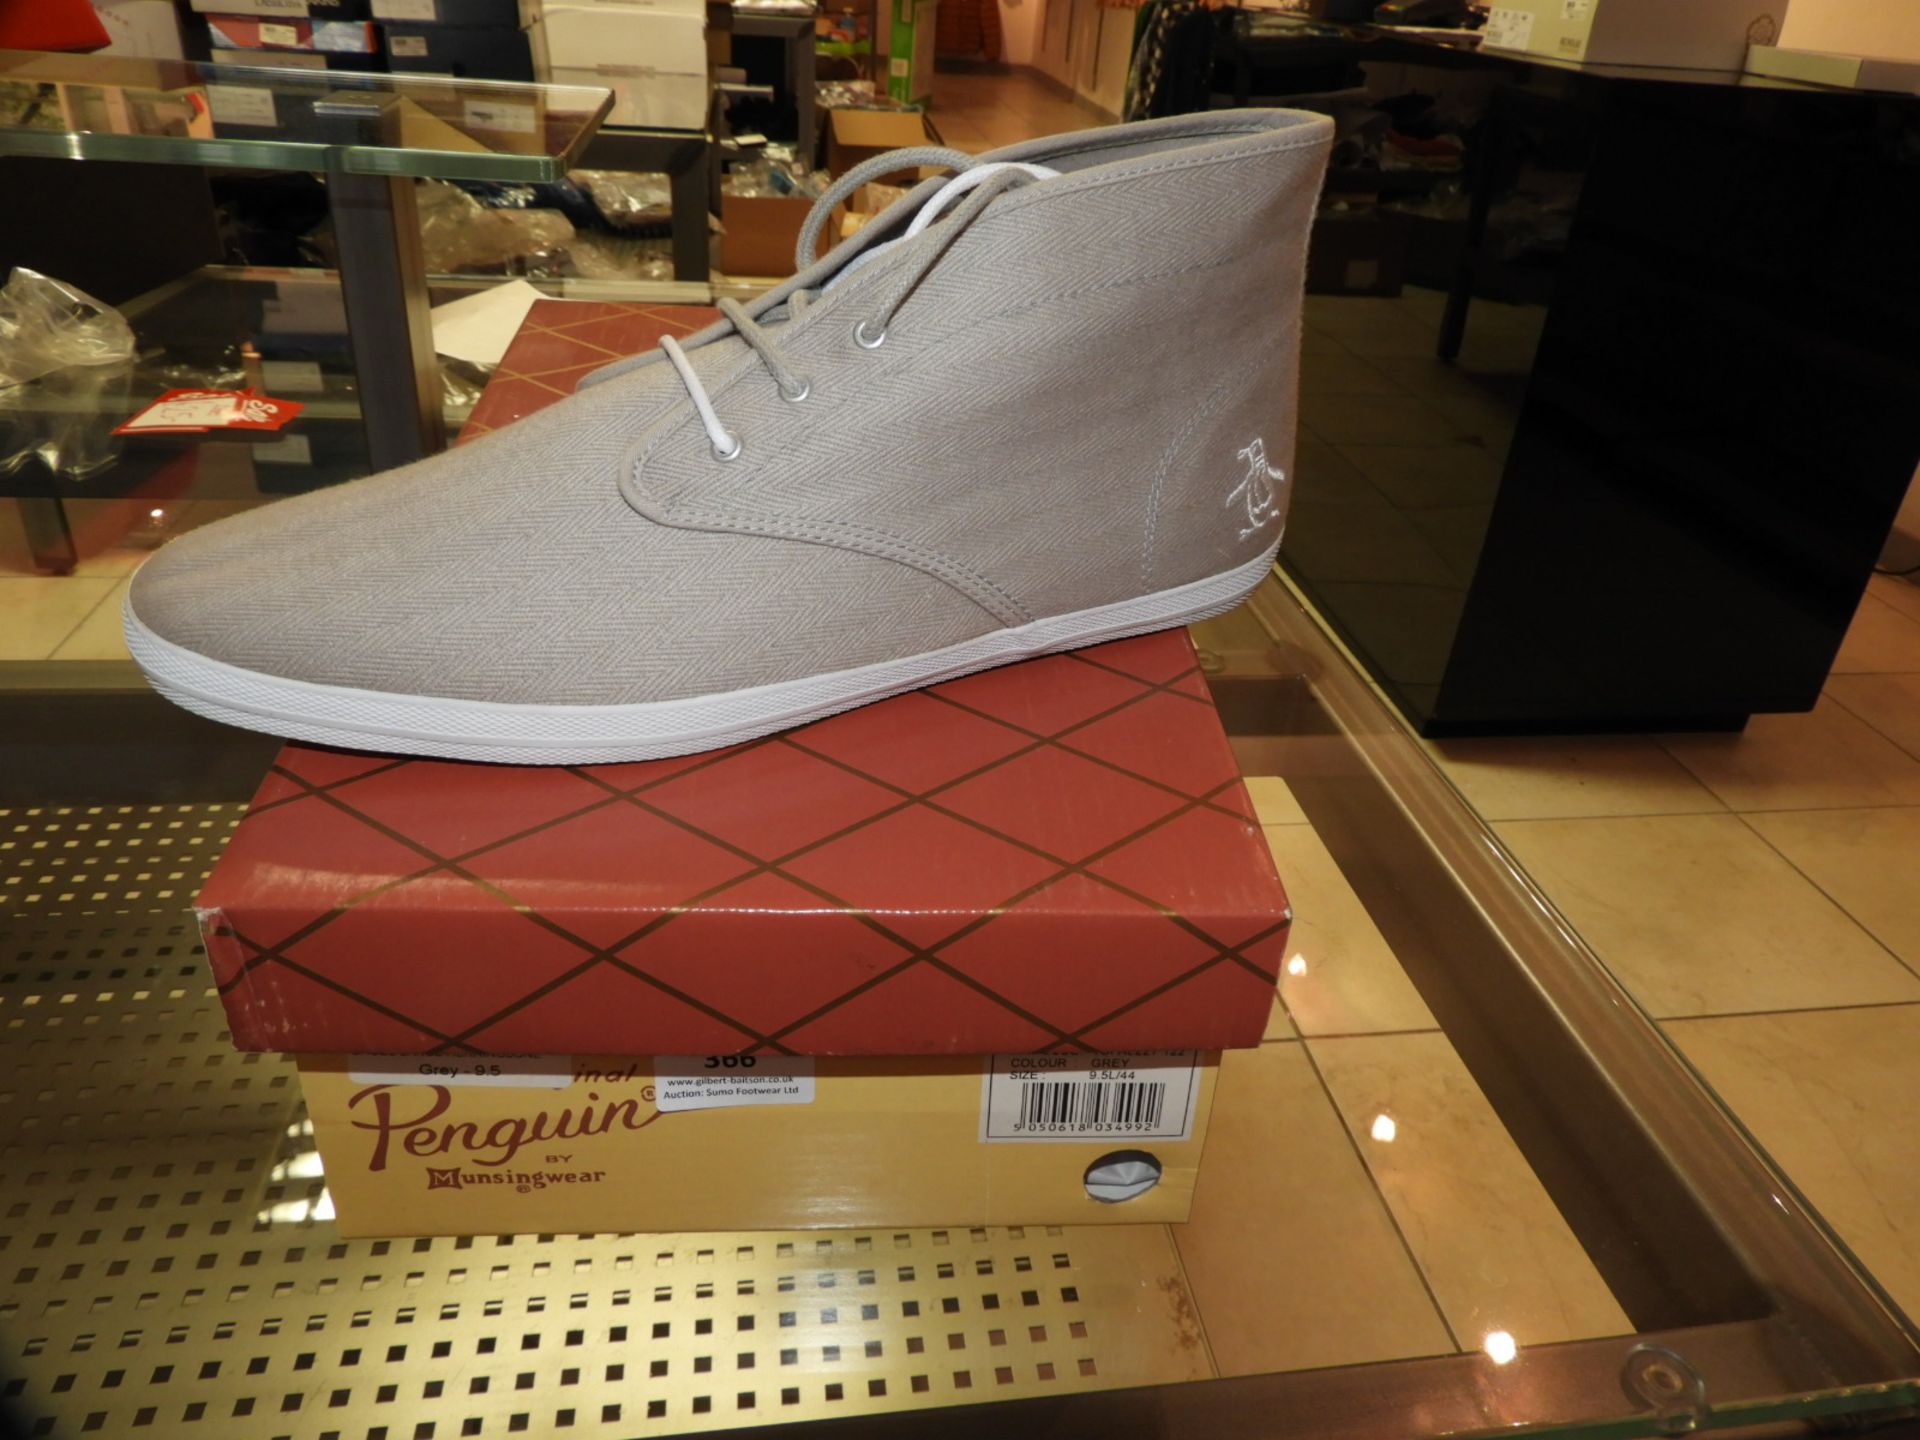 *Pair of Penguin Gents Shoes (Grey) Size: 9.5